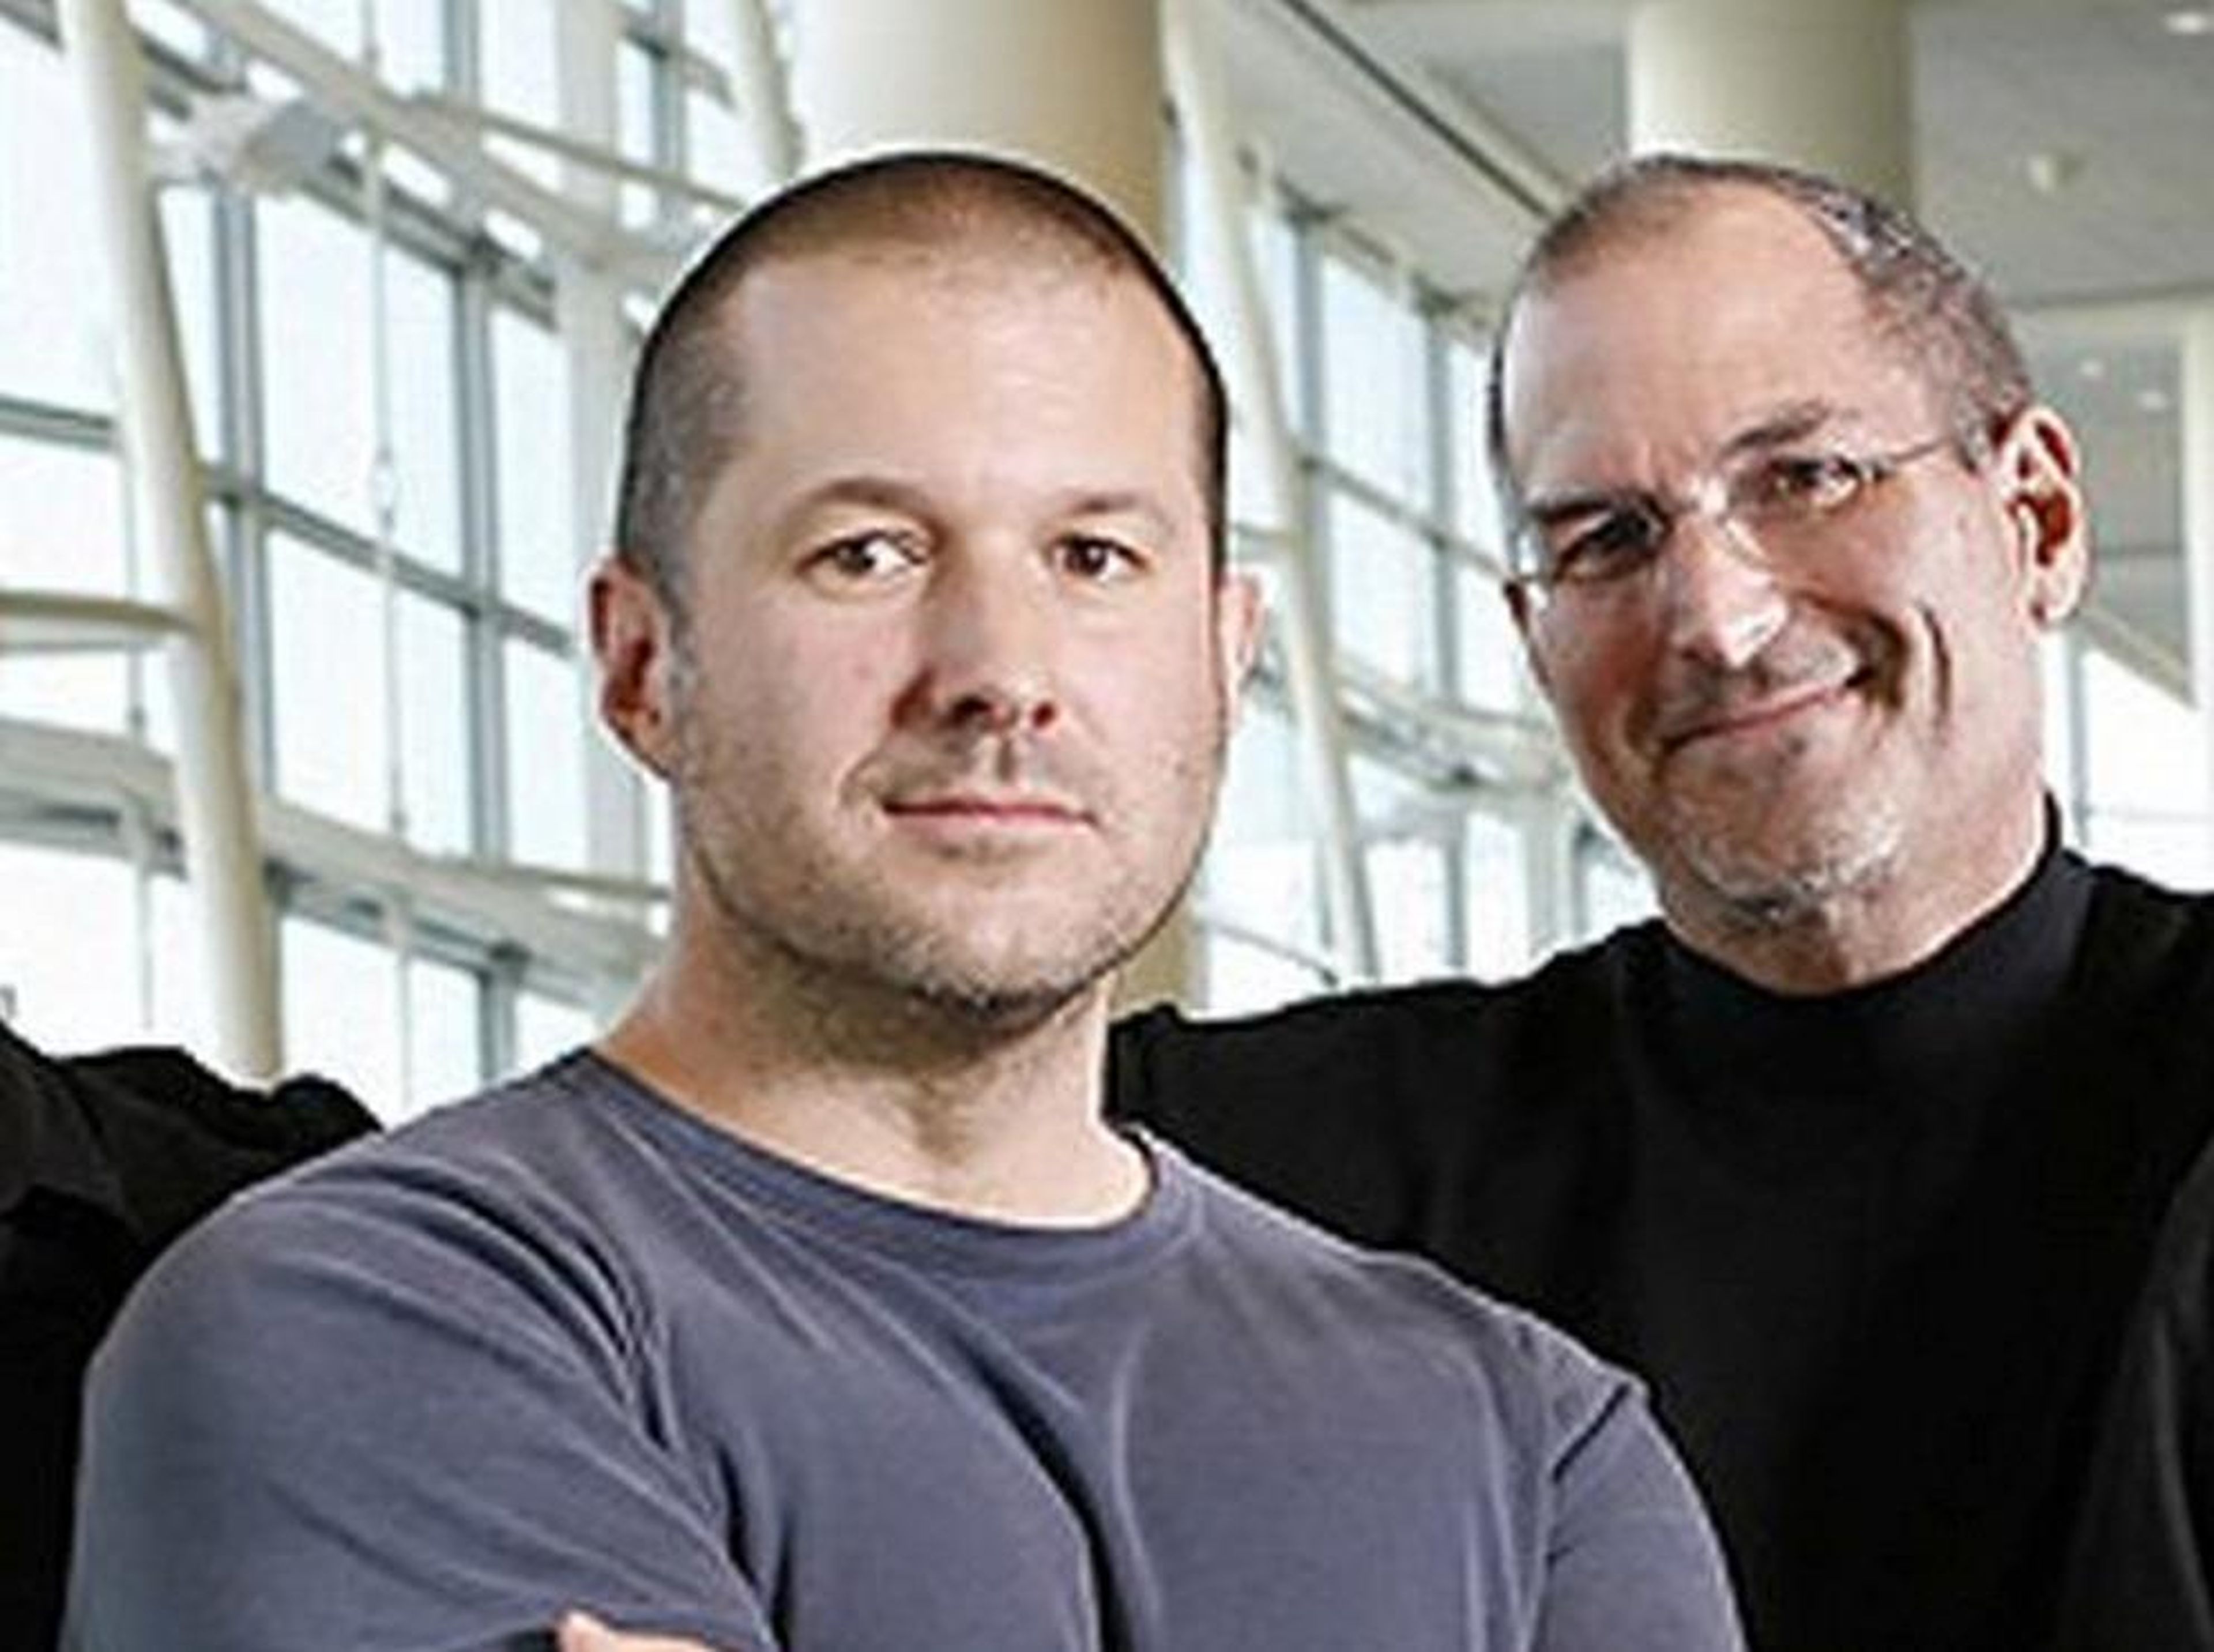 Over the years, Jobs' Apple had been asked to extend its design expertise to creating a new touch-screen device. In 2004, Jobs convened Project Purple, under his supervision with Ive in charge, to develop a touch-screen device.